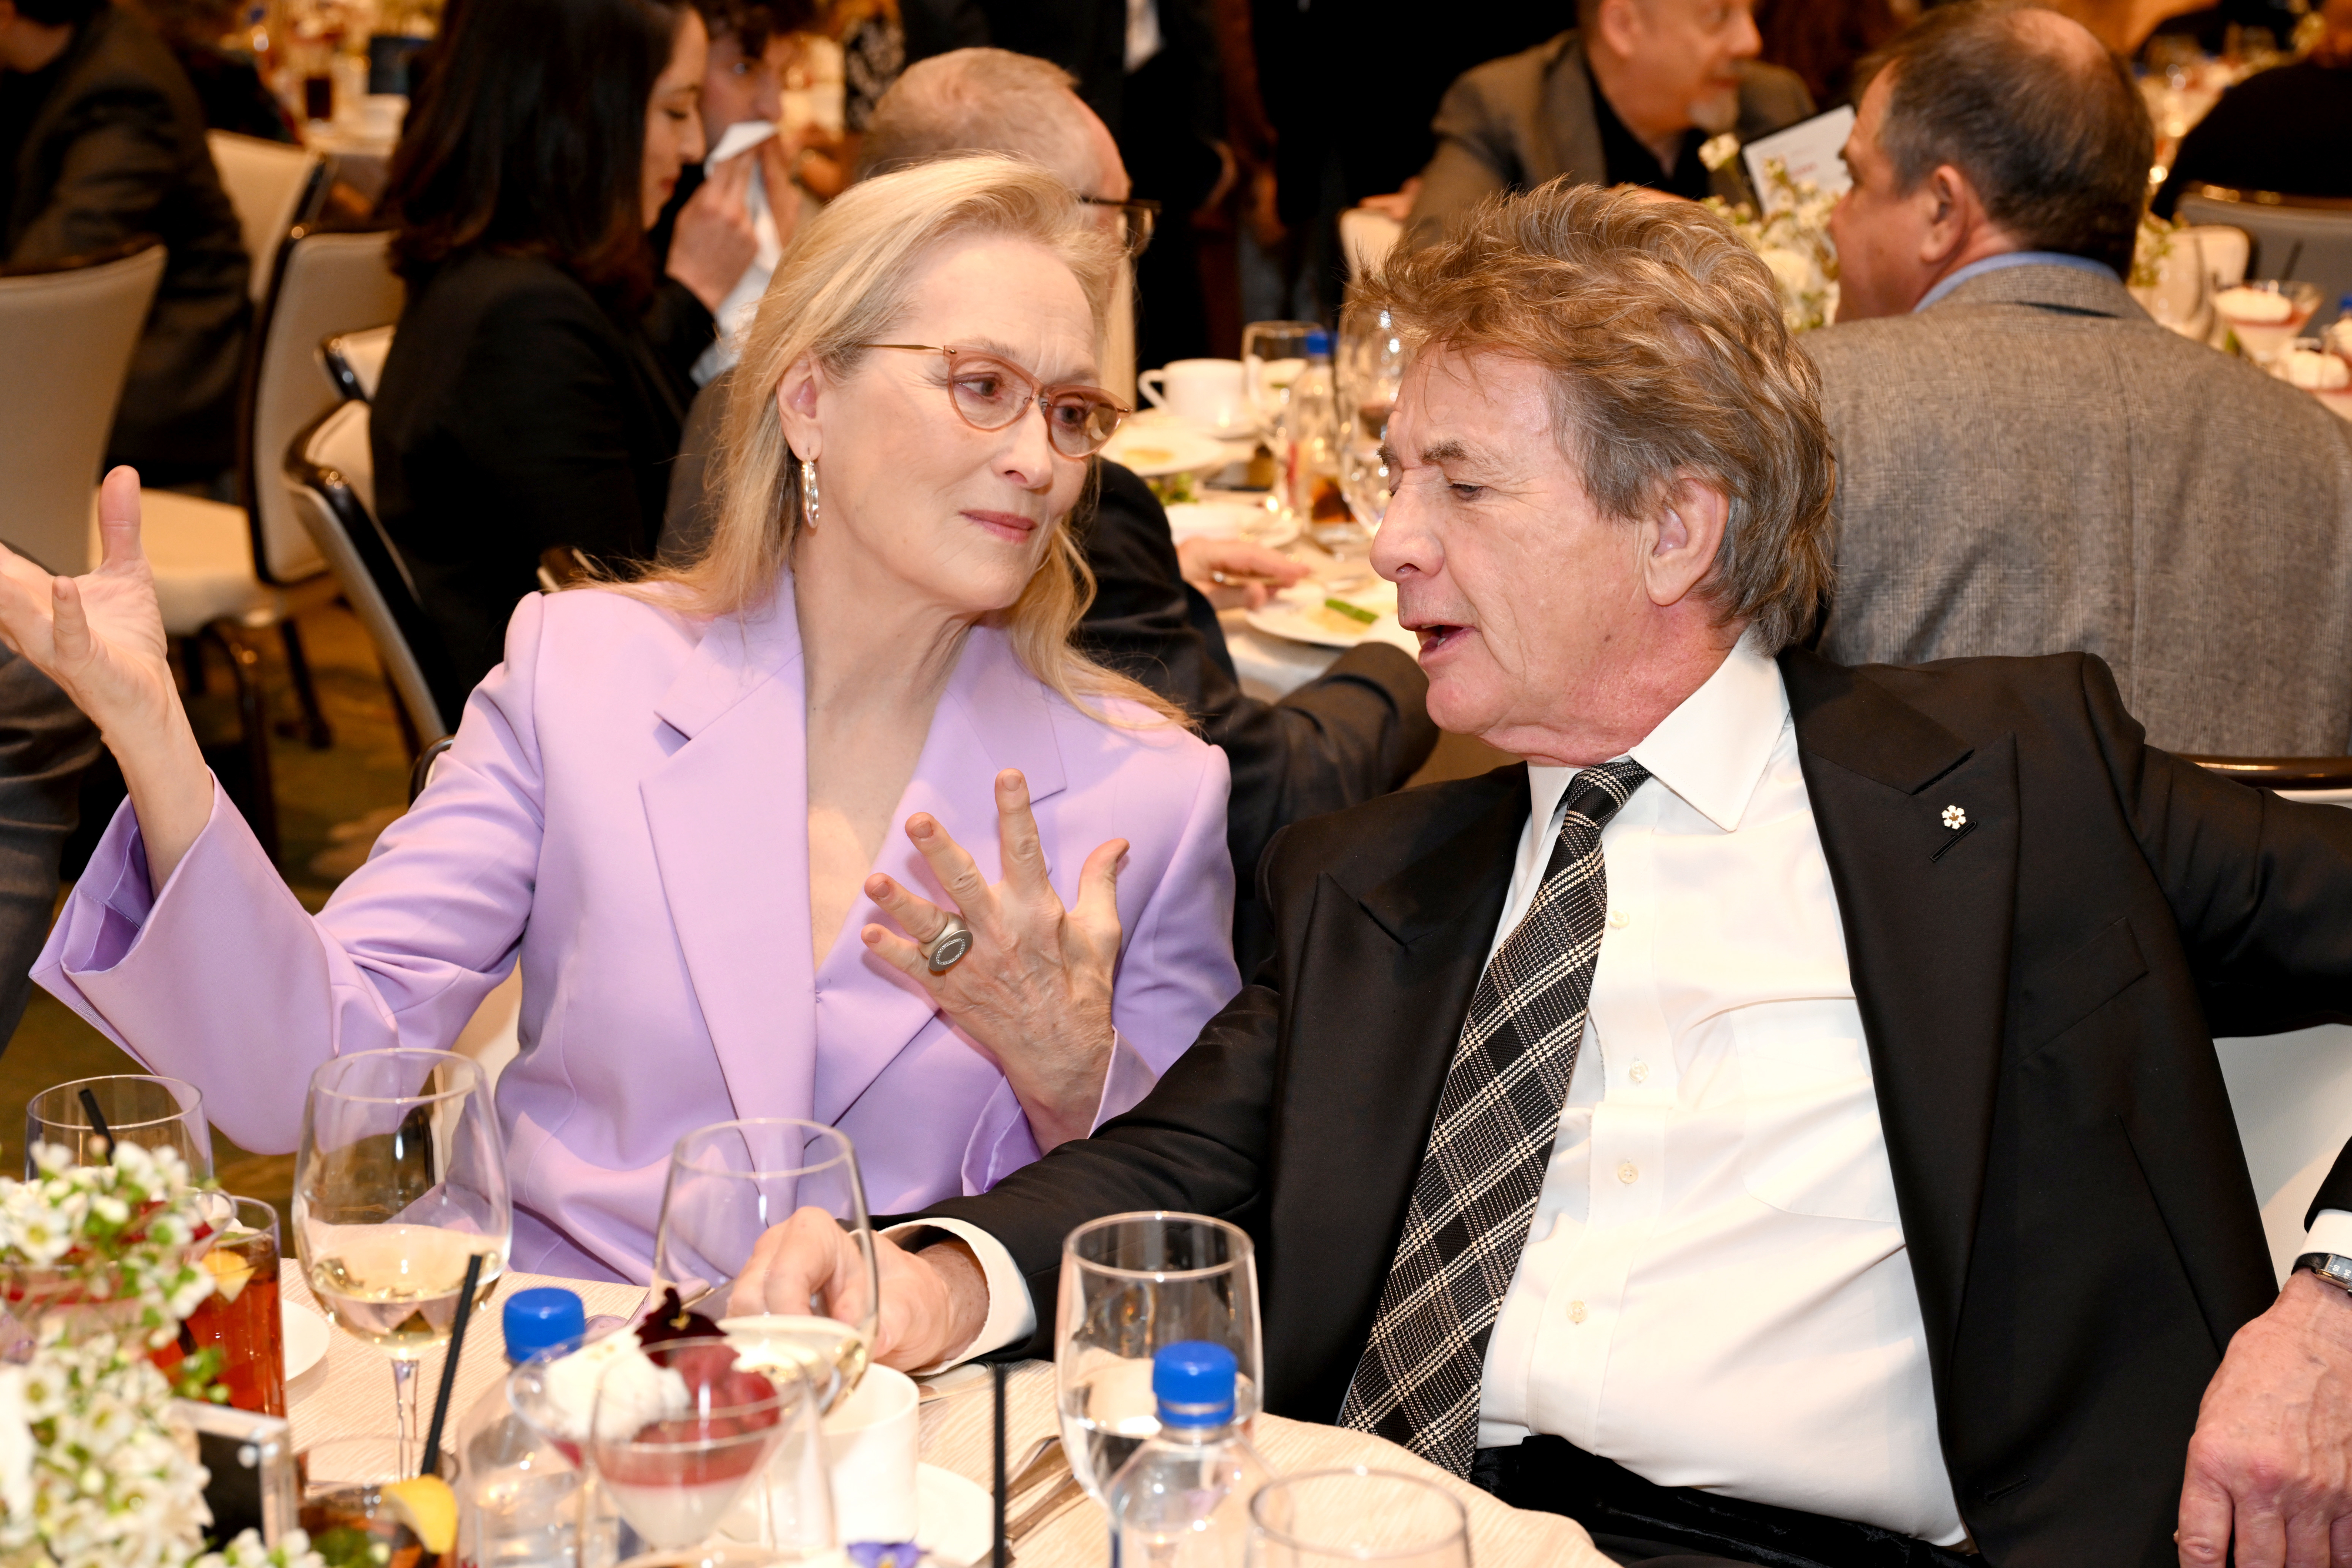 Two individuals sitting at a table engaged in conversation, man in black suit and woman in pastel blazer